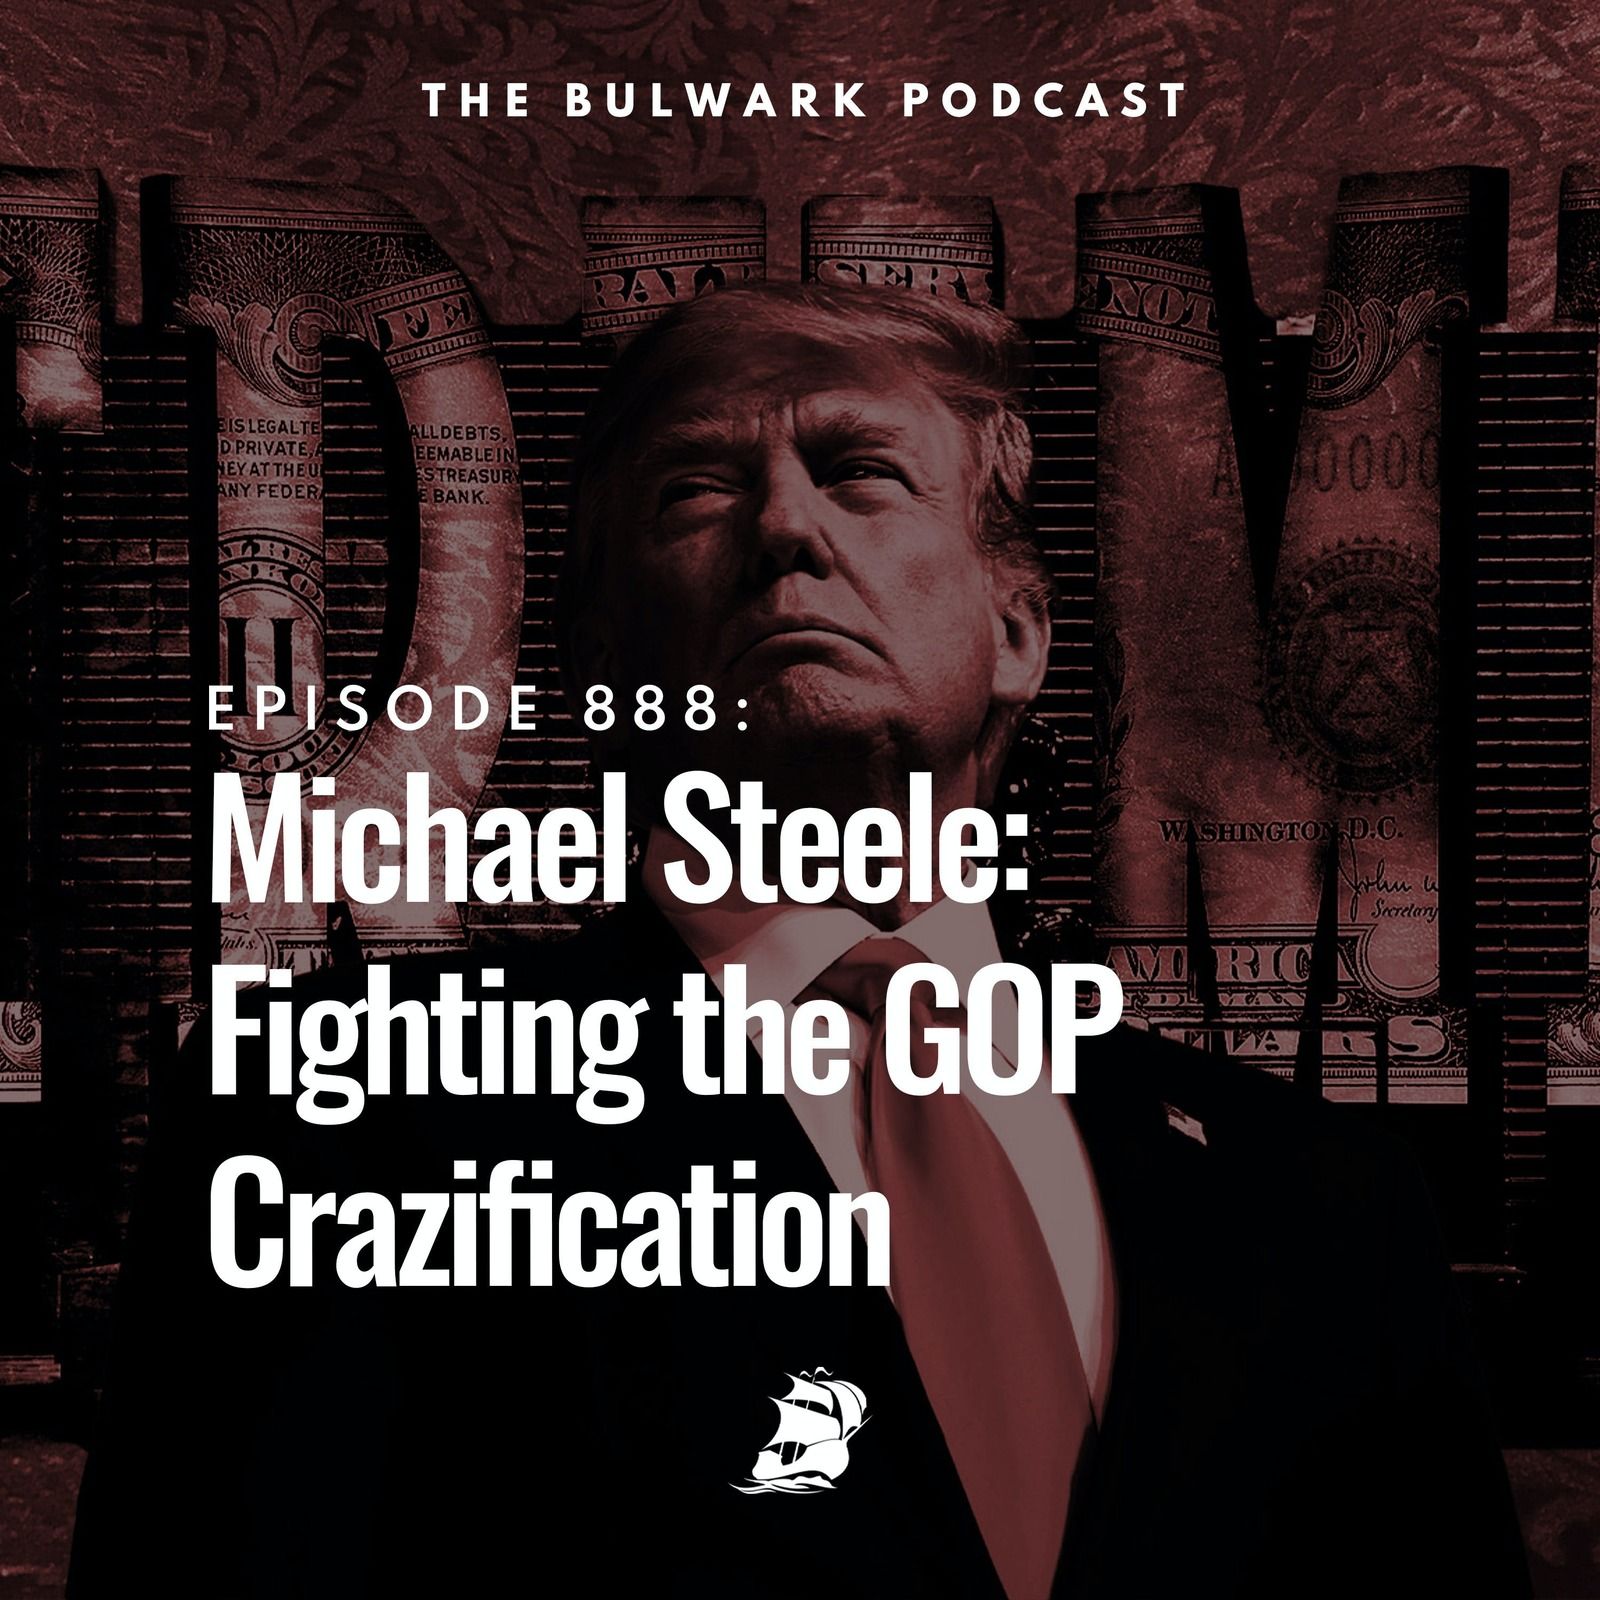 Michael Steele: Fighting the GOP Crazification